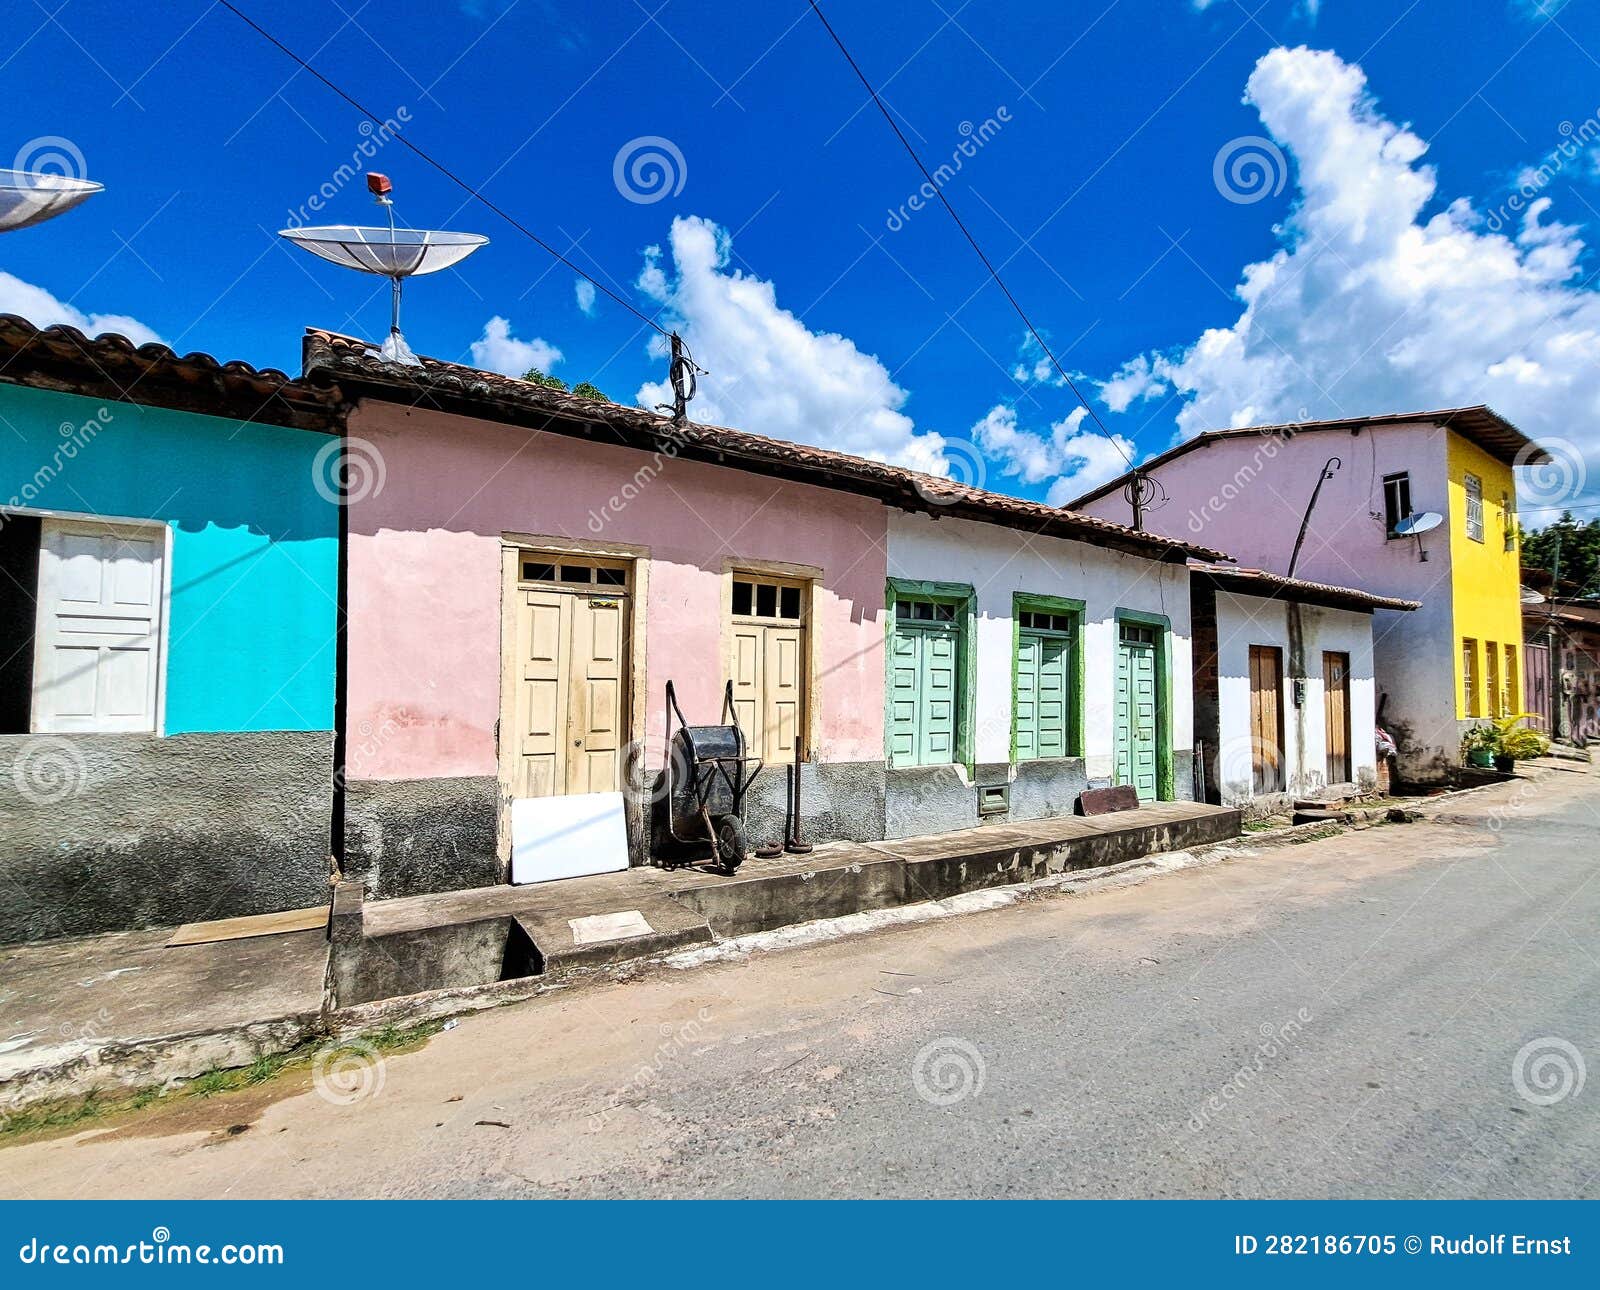 street with colorful houses in colonial style at palmeiras in vale do capao in chapada diamantina, bahia, brazil